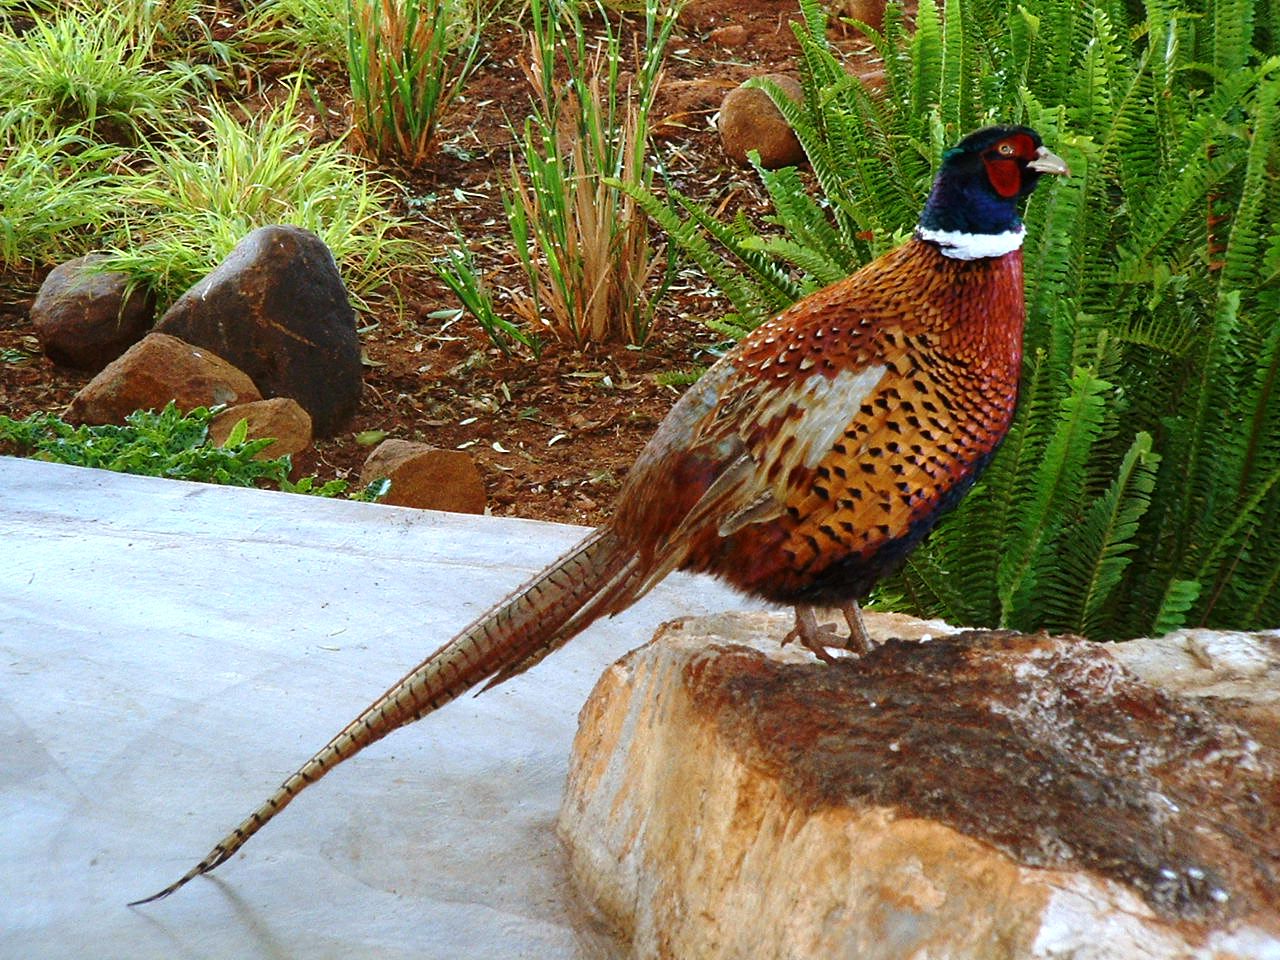 All Wallpapers Colourful Pheasant Birds Wallpapers HD Wallpapers Download Free Map Images Wallpaper [wallpaper376.blogspot.com]